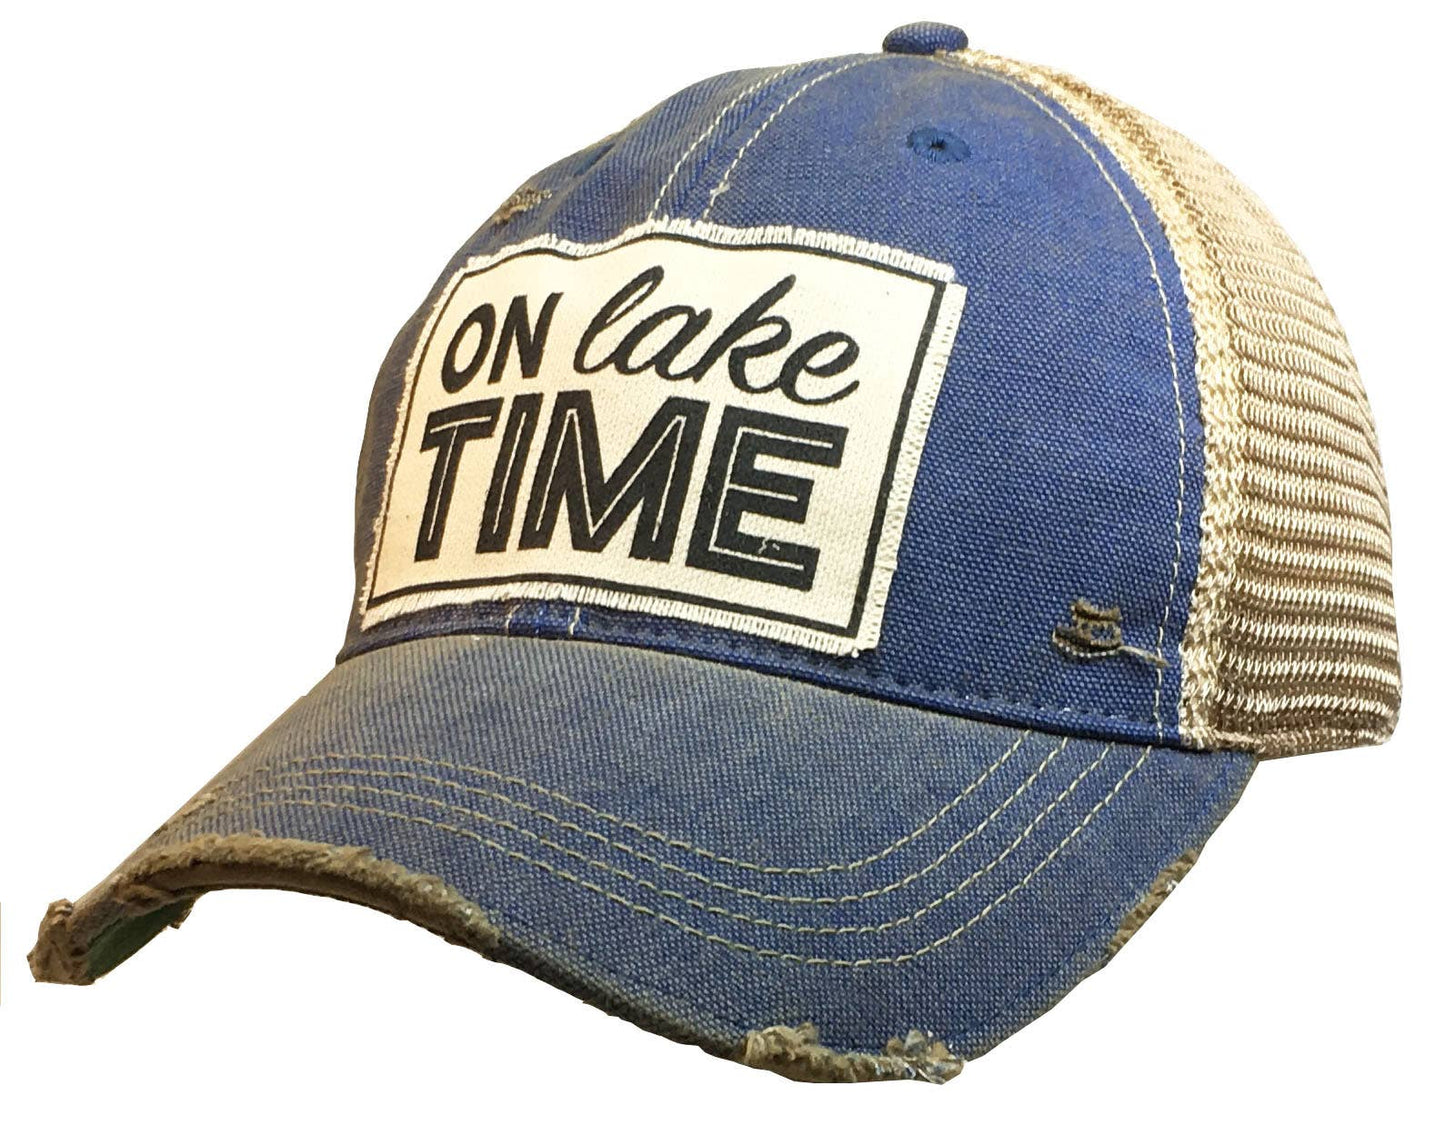 On Lake Time Distressed Trucker Cap